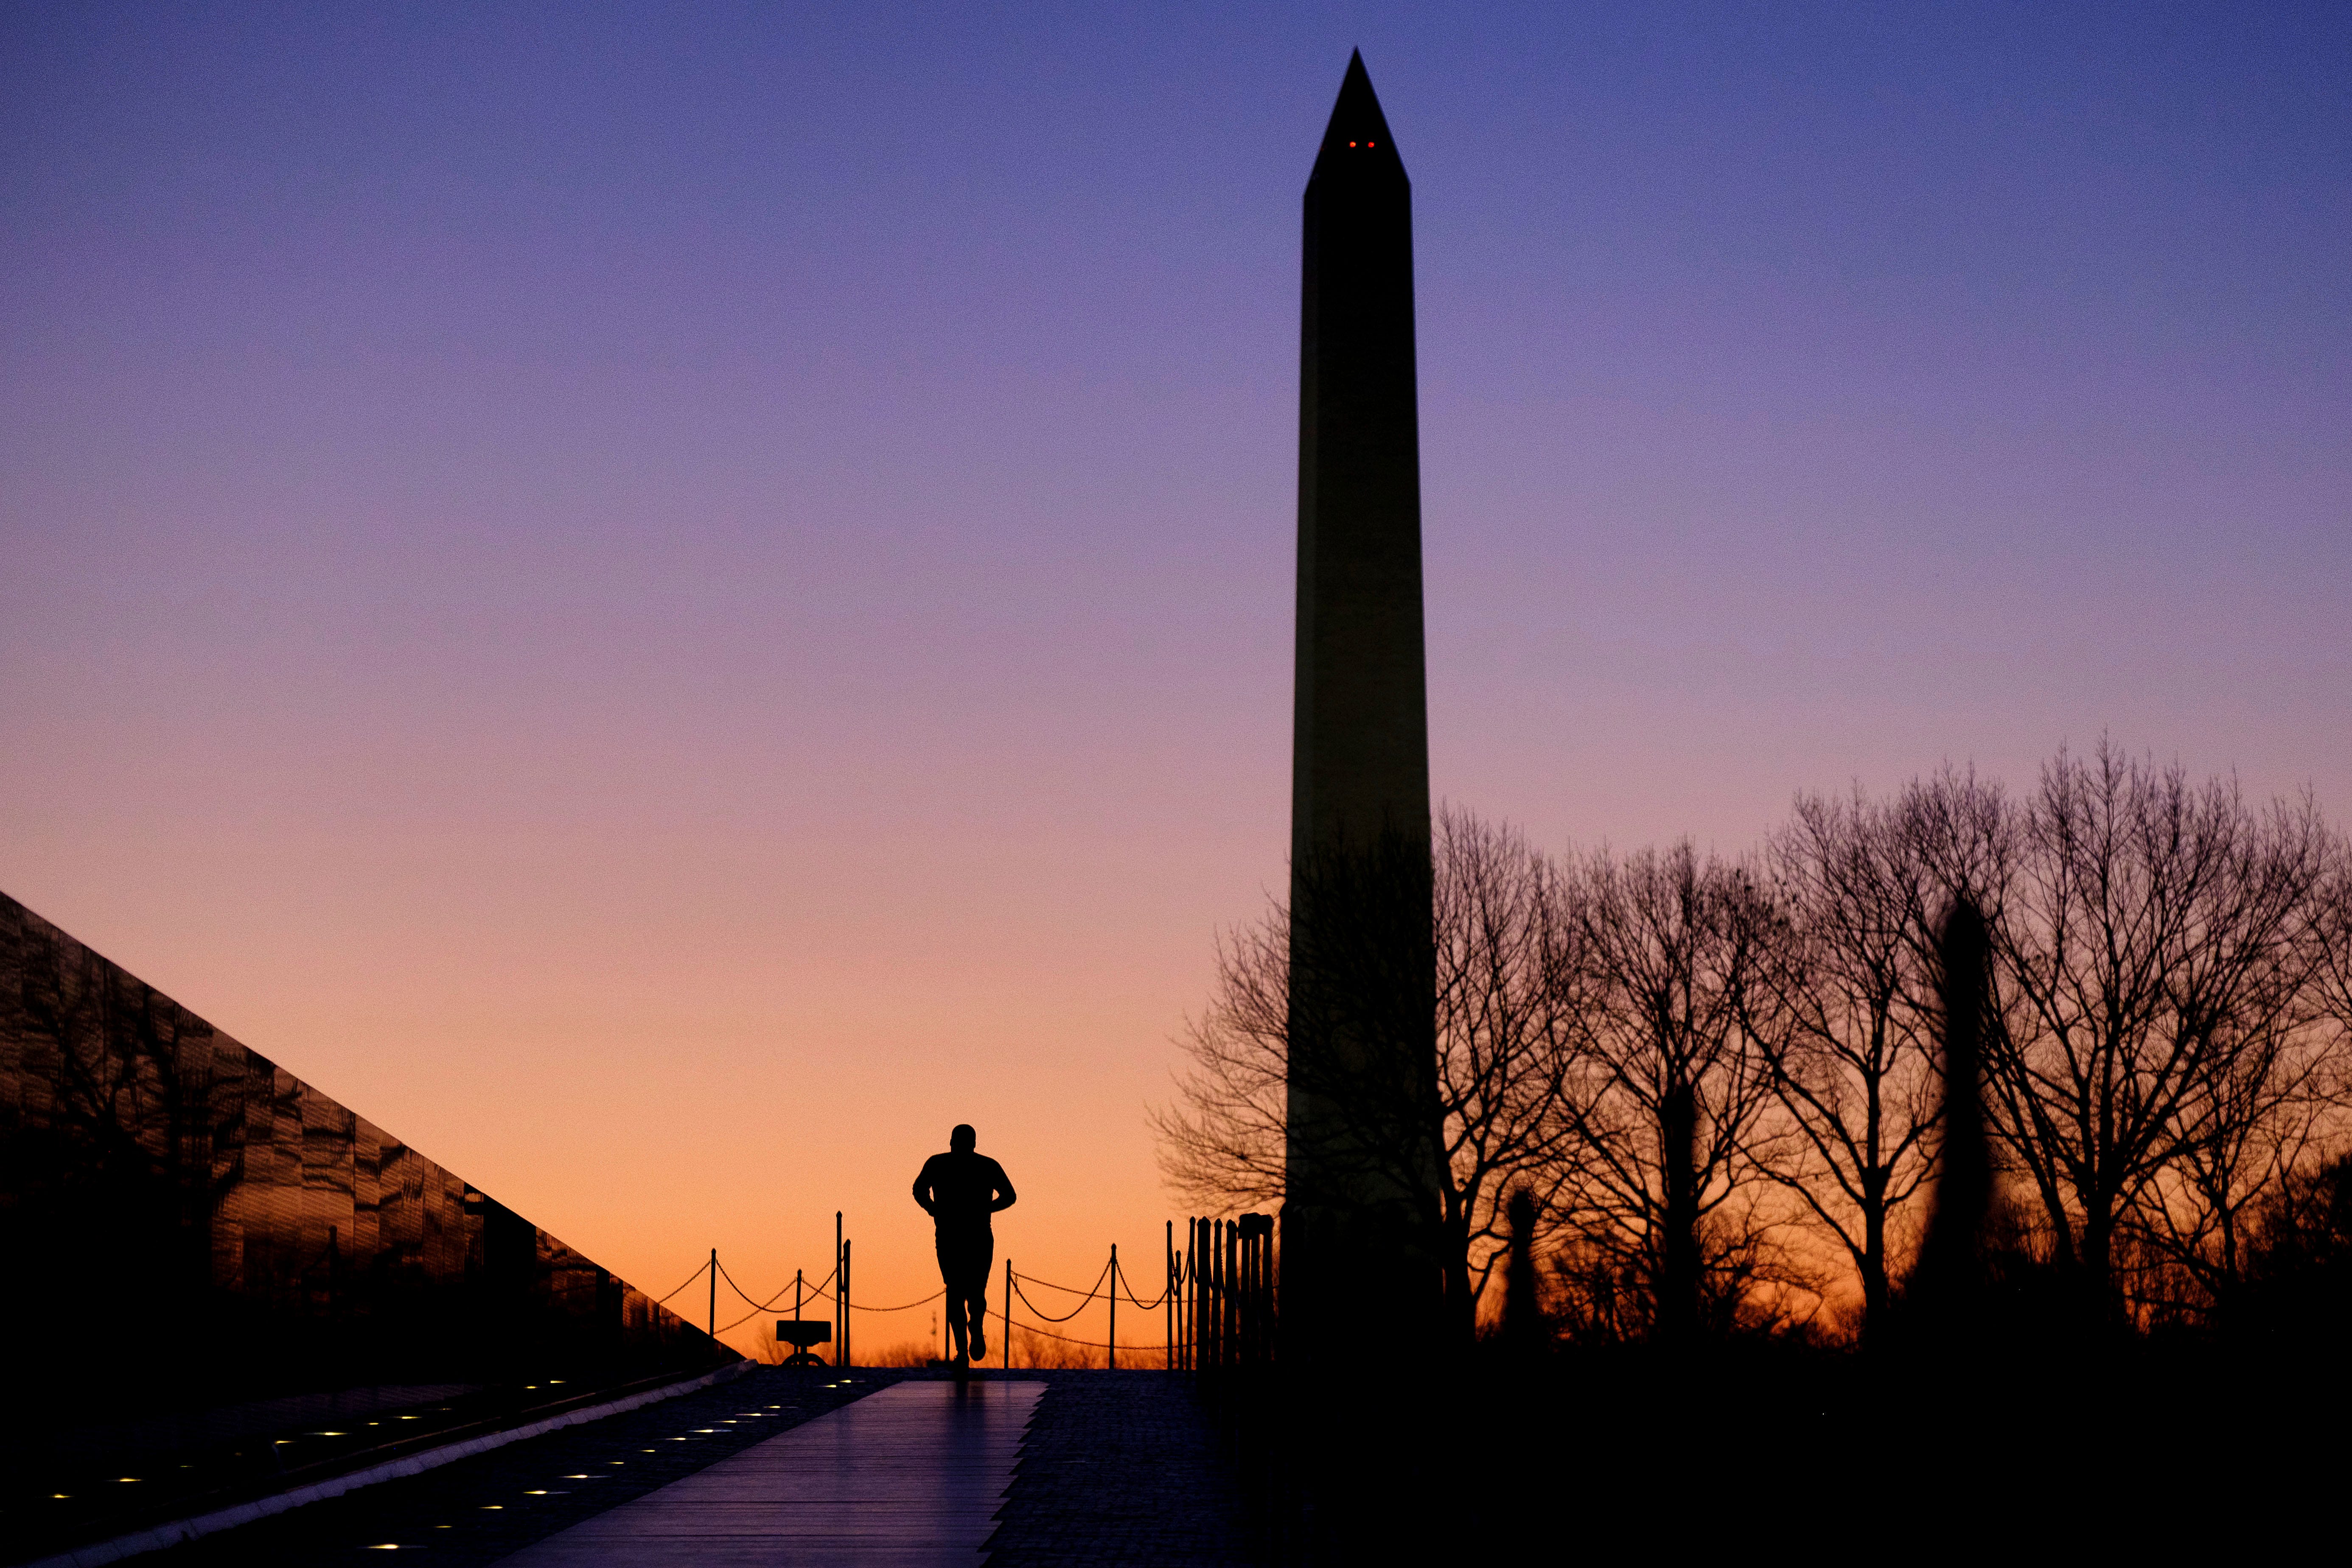 An early morning runner heads past the Vietnam War Memorial towards the Washington Monument at daybreak in Washington.